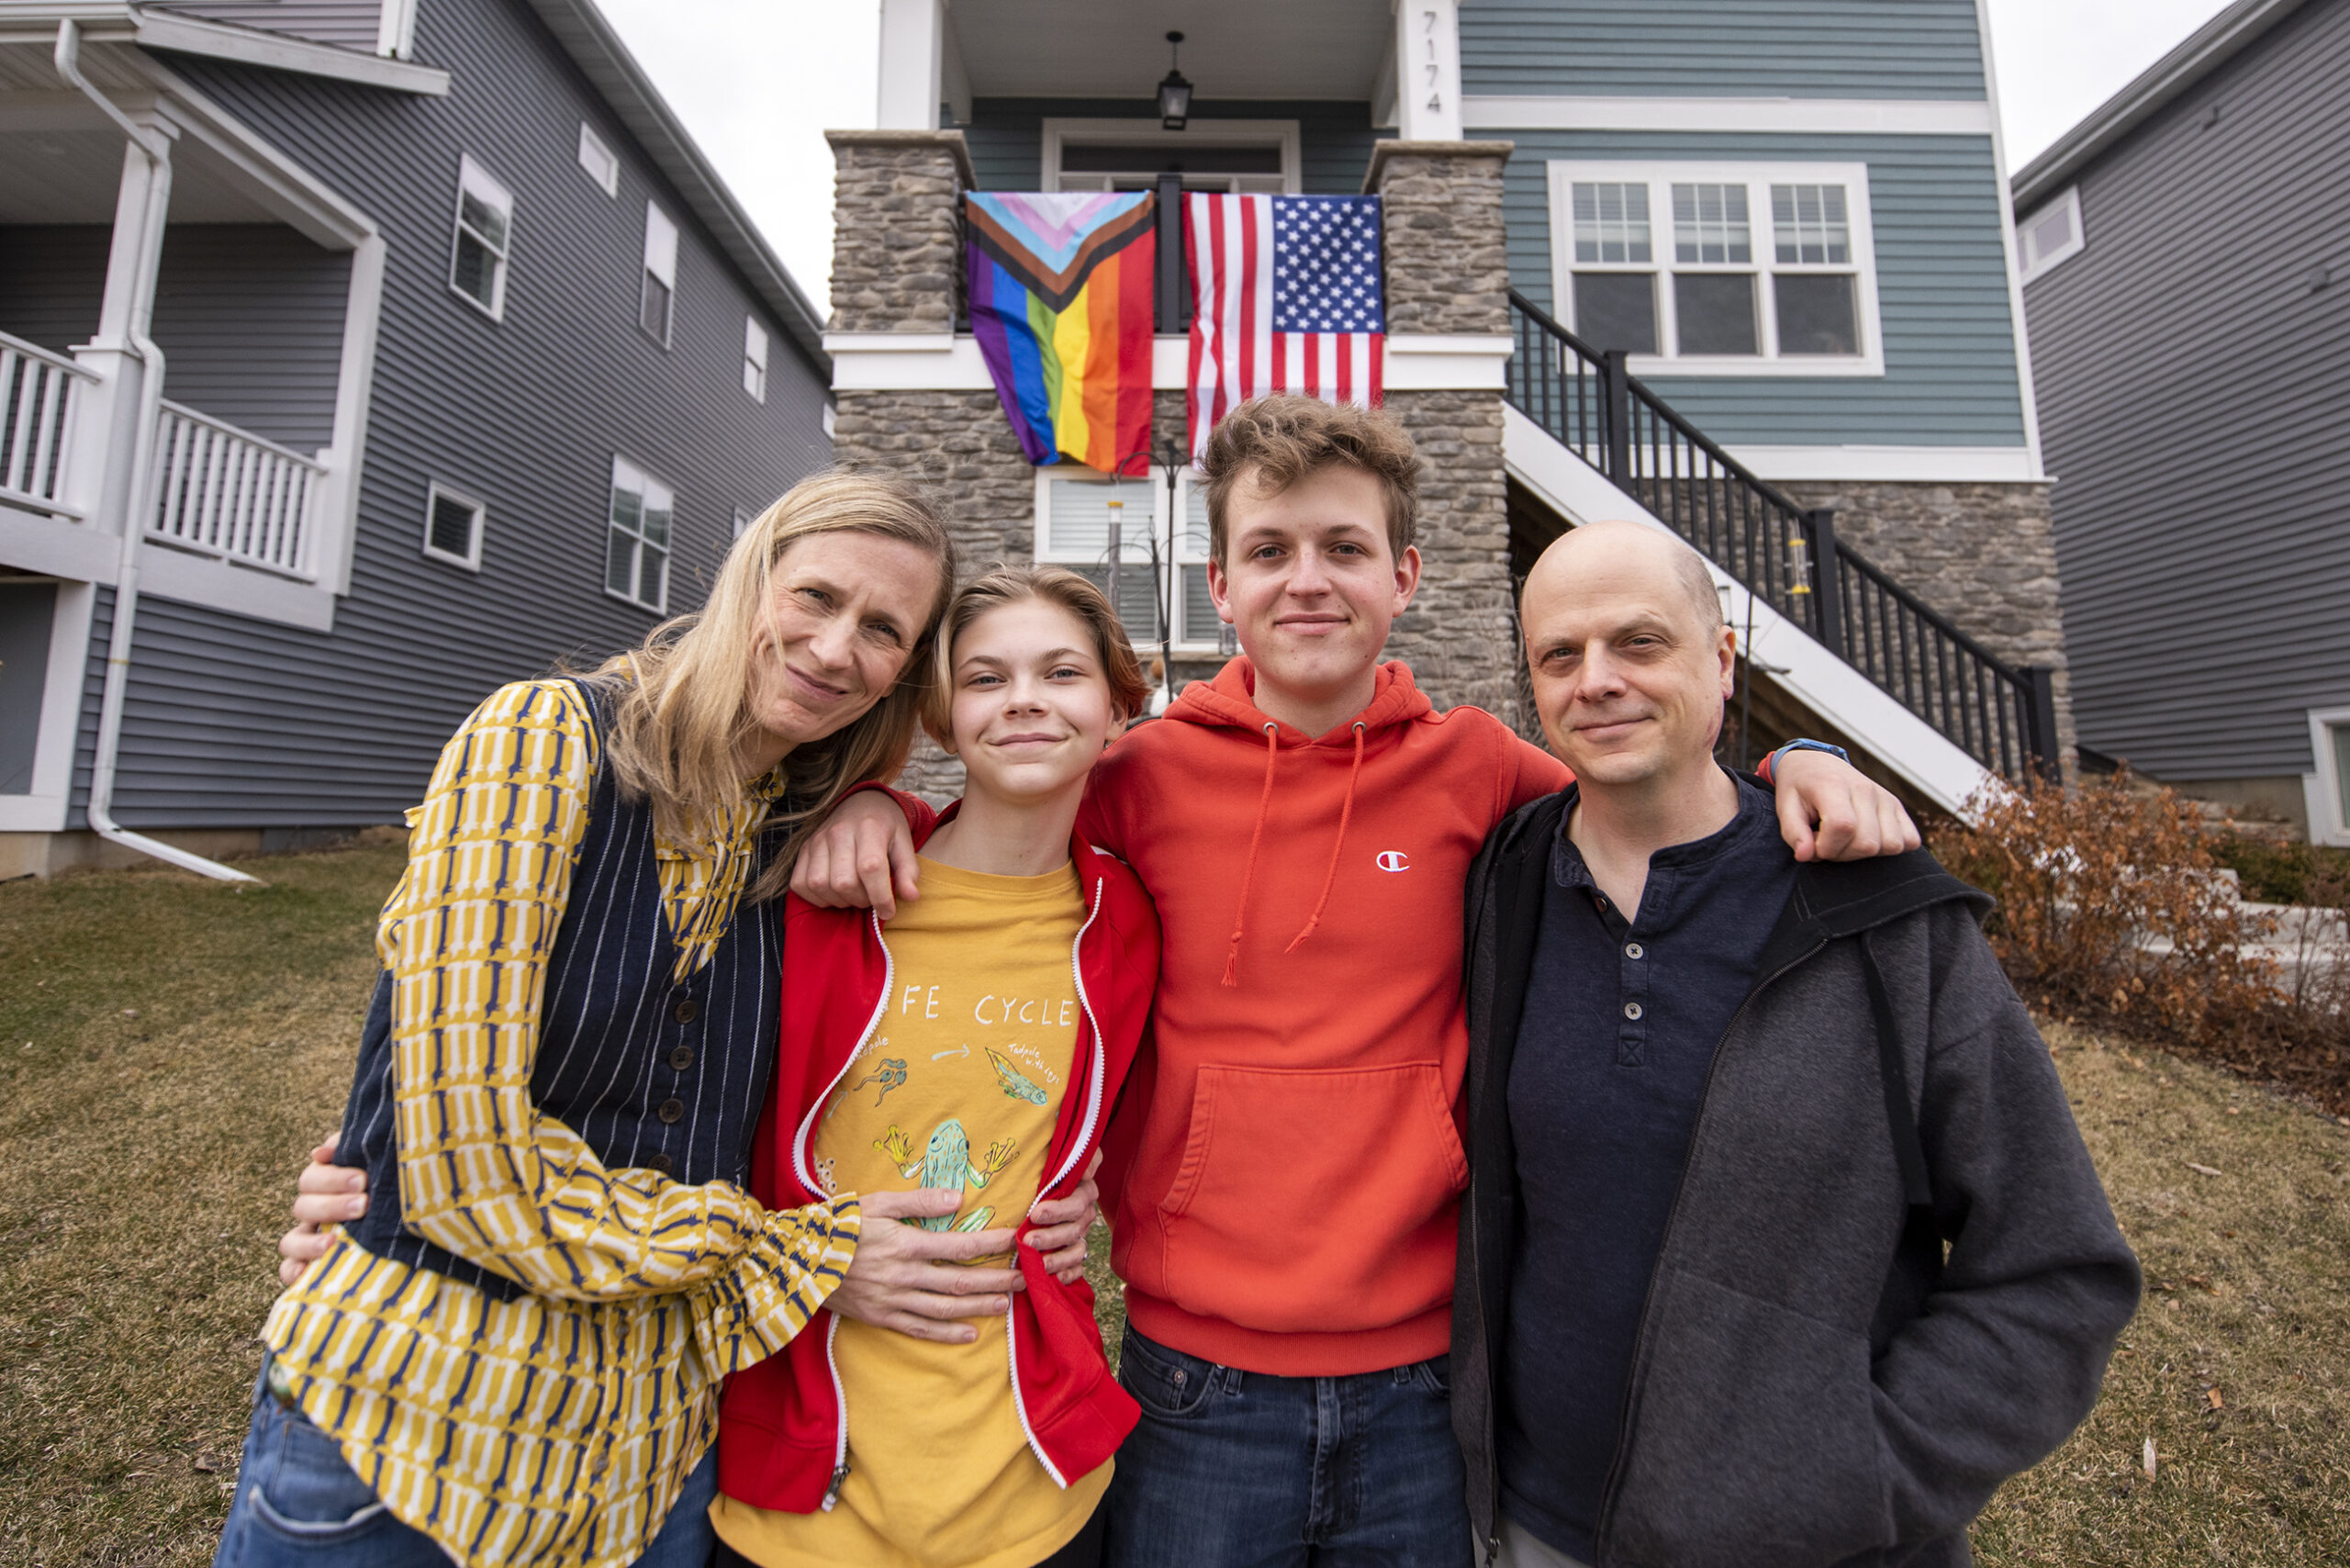 Bailey Mosling's family stands next to him outside of their home. An LGBT pride flag & U.S. flag hang outside their balcony.